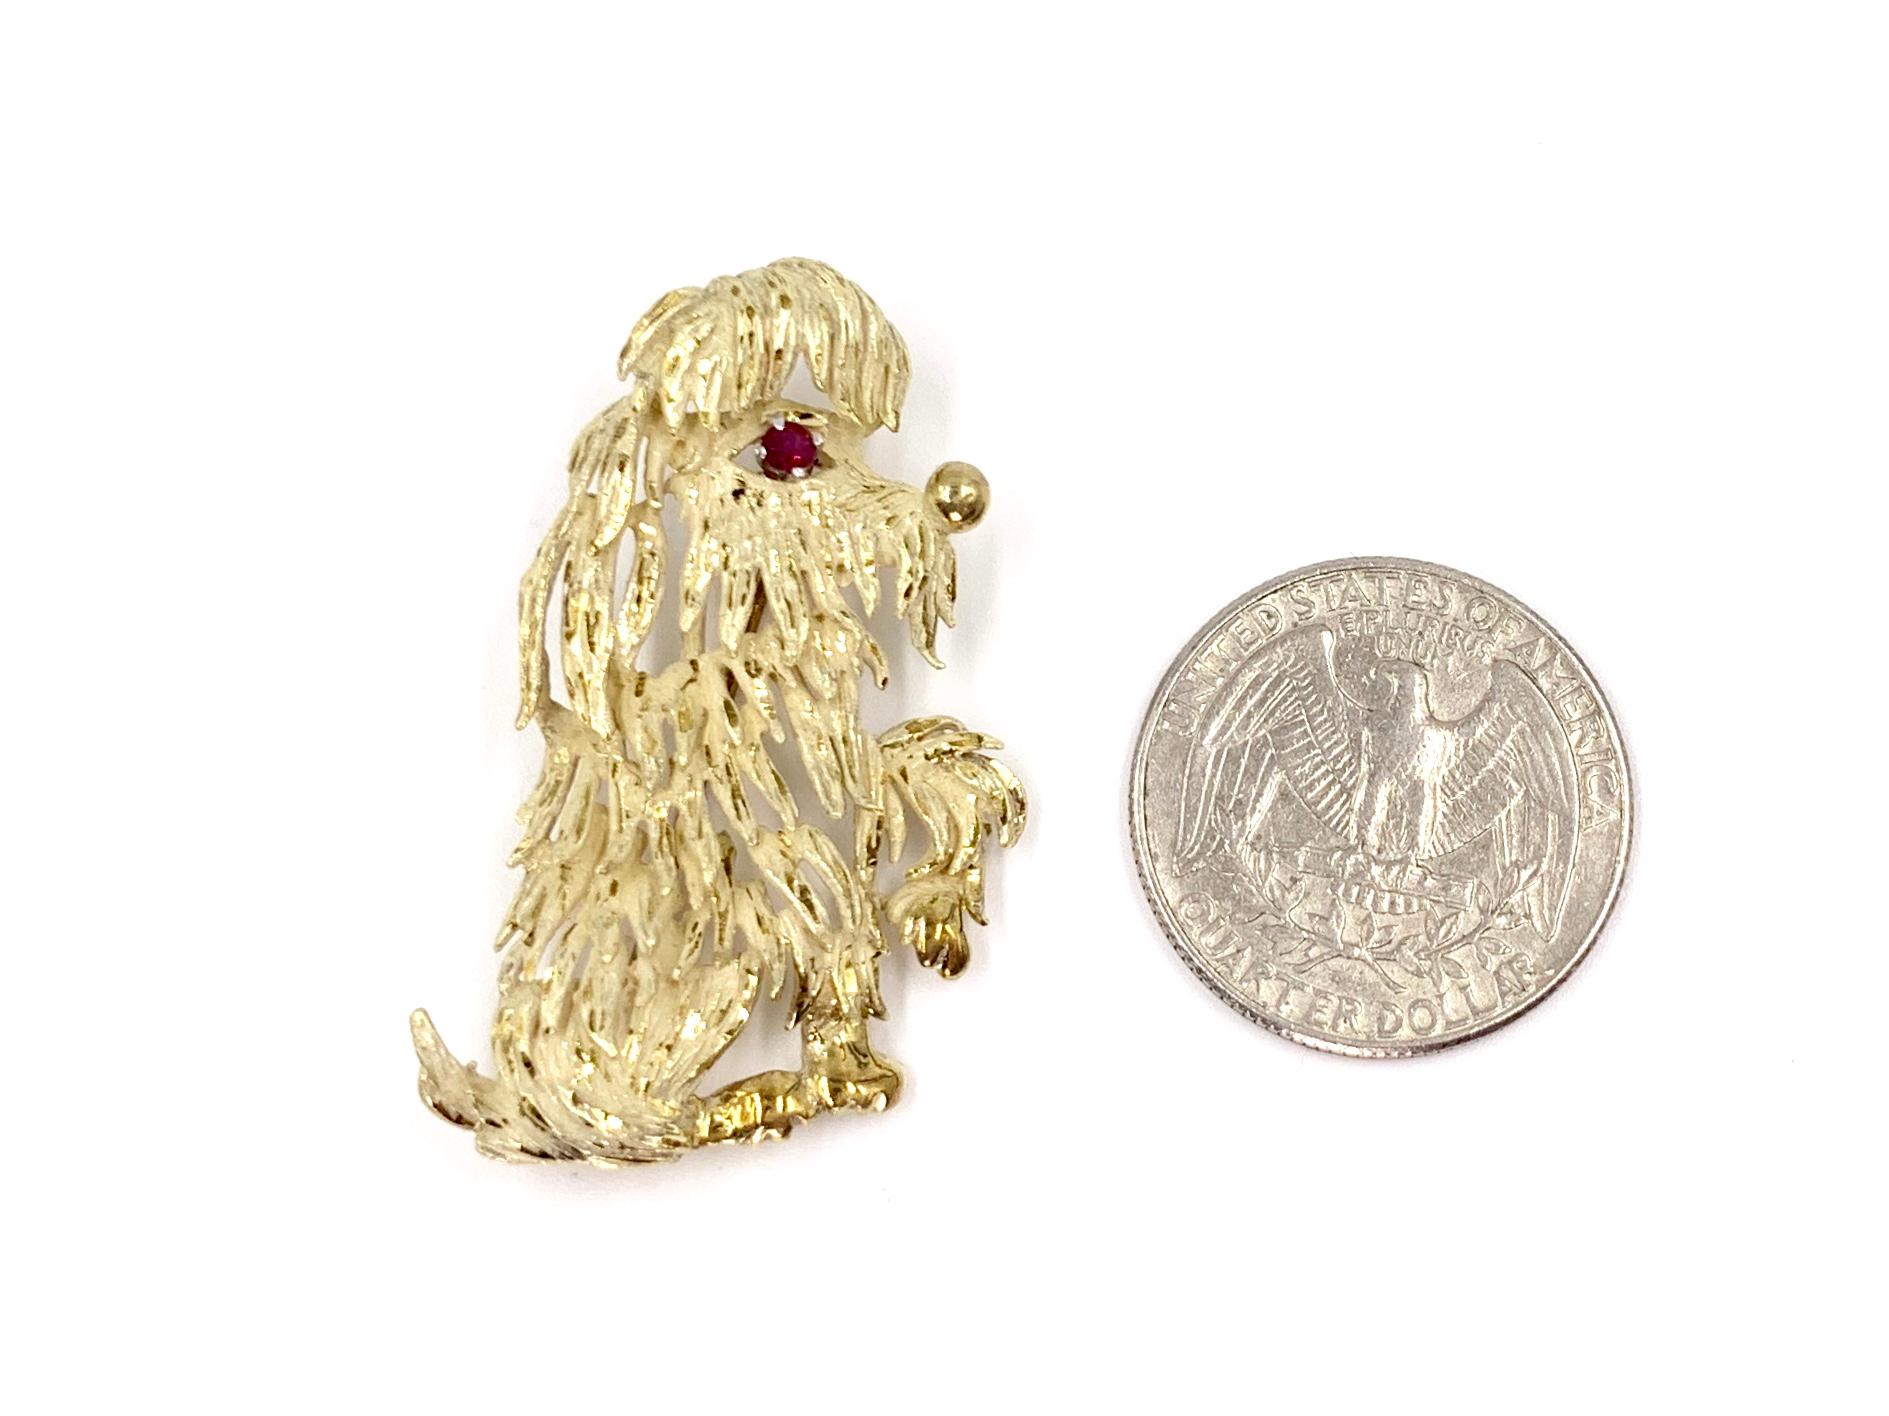 Round Cut Yellow Gold and Ruby Shaggy Dog Brooch, circa 1960s